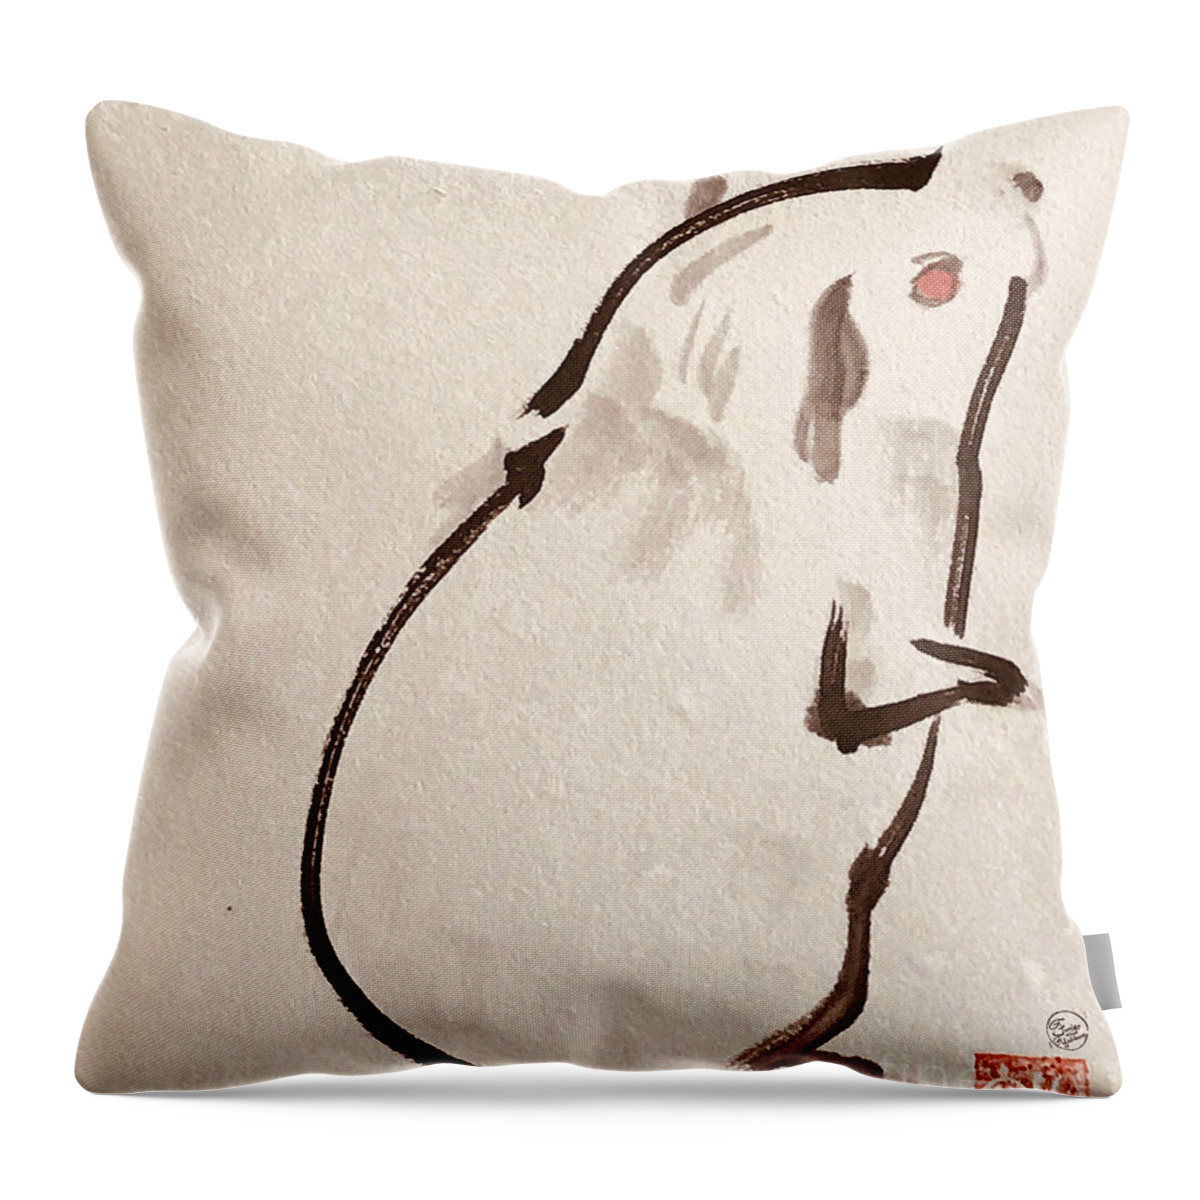 Japanese Throw Pillow featuring the painting Looking for the Friend by Fumiyo Yoshikawa